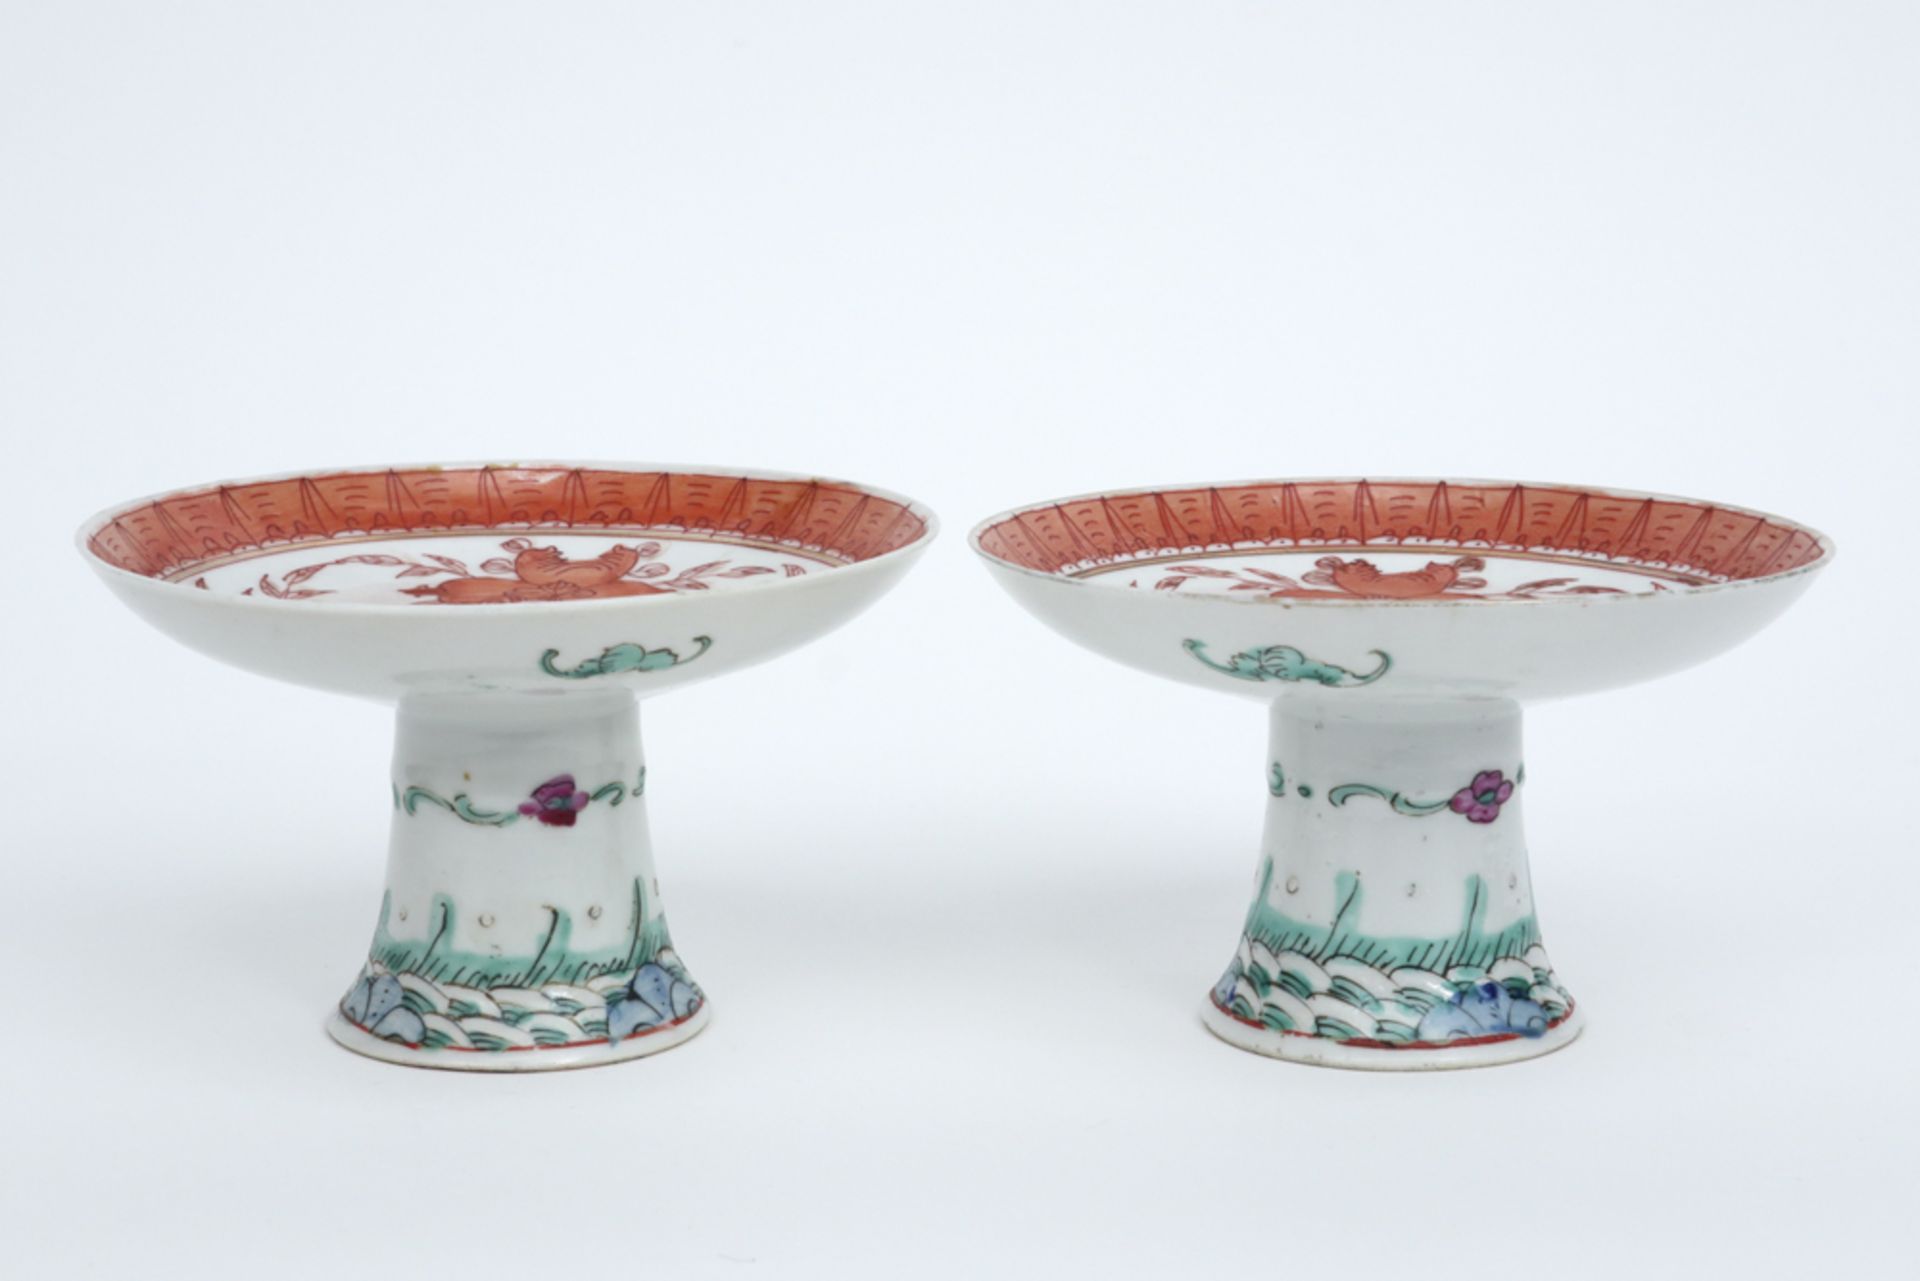 pair of small antique tazza's in Chinese porcelain with polychrome decor || Paar antieke Chinese